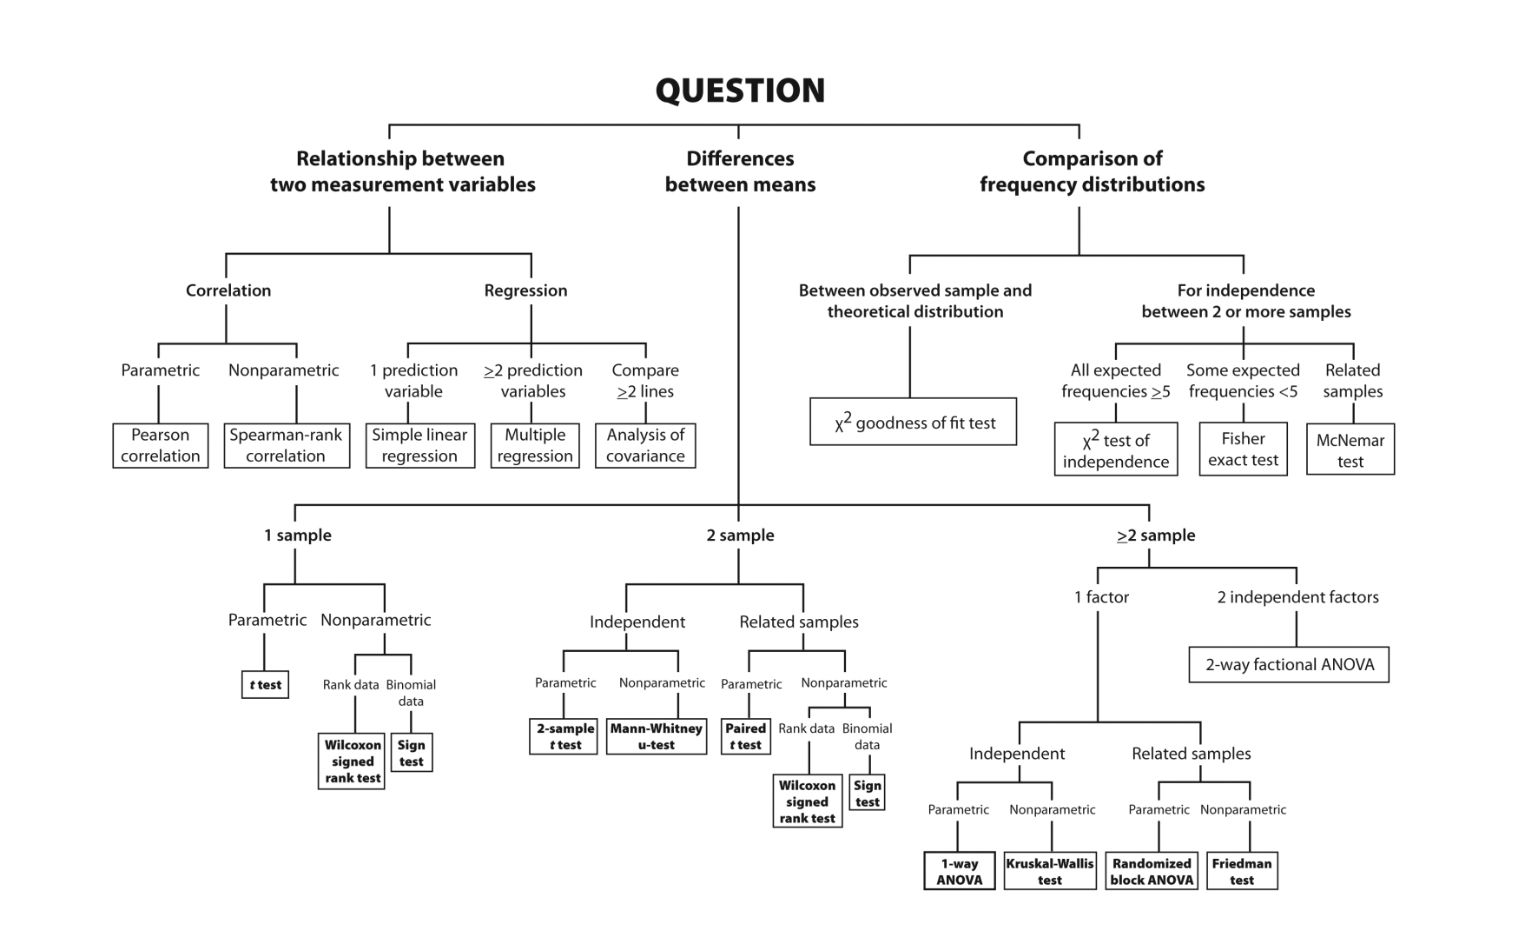 hypothesis testing flow chart